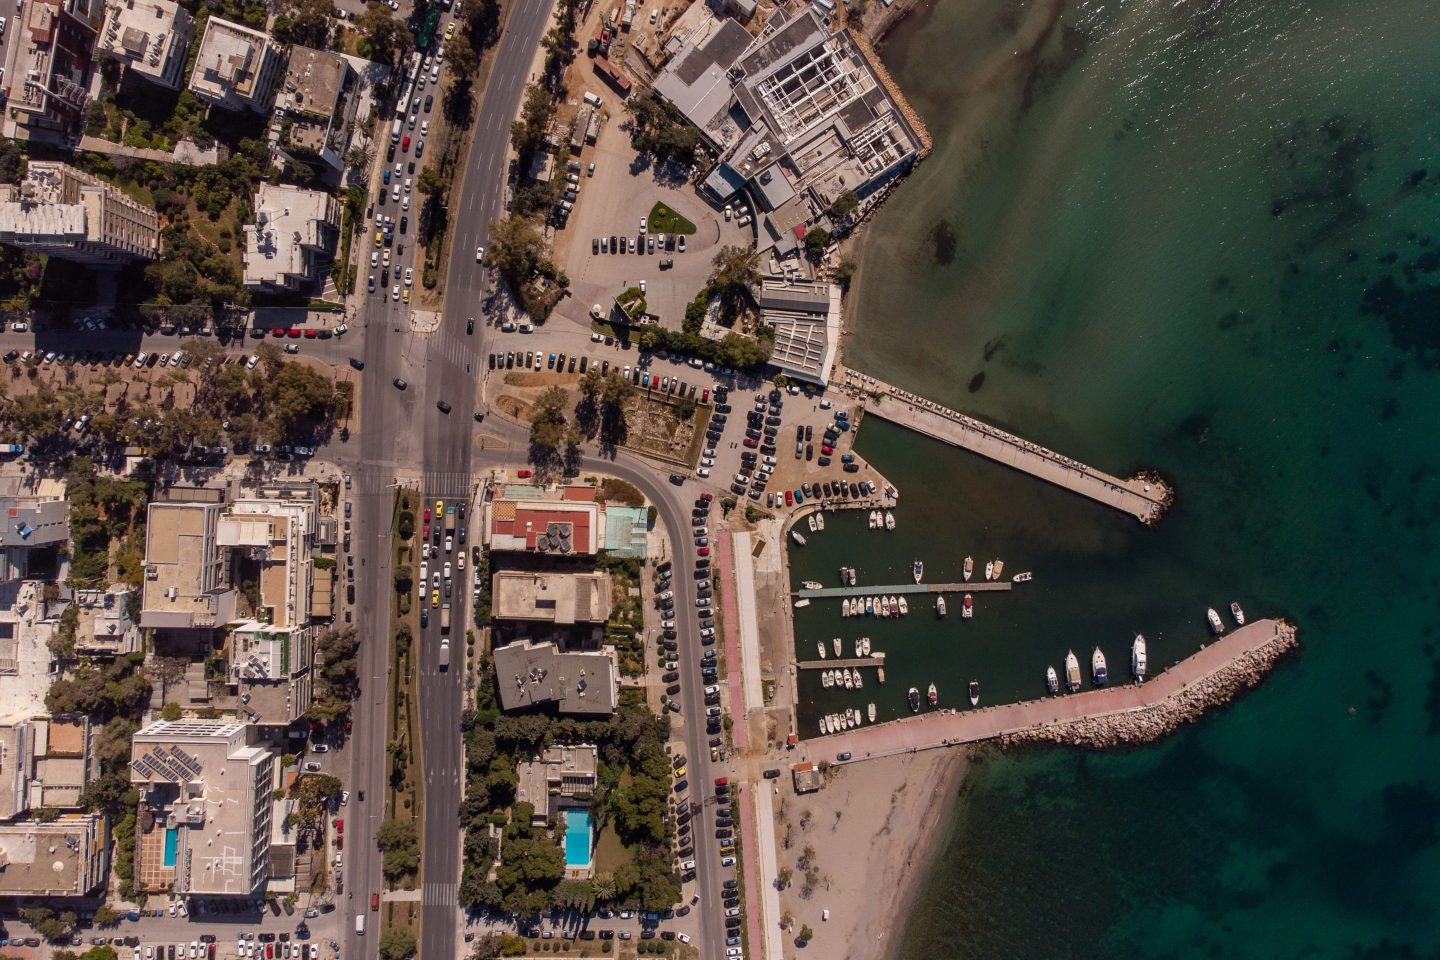 An aerial view of the coastline at Glyfada suburb, near Athens, Greece